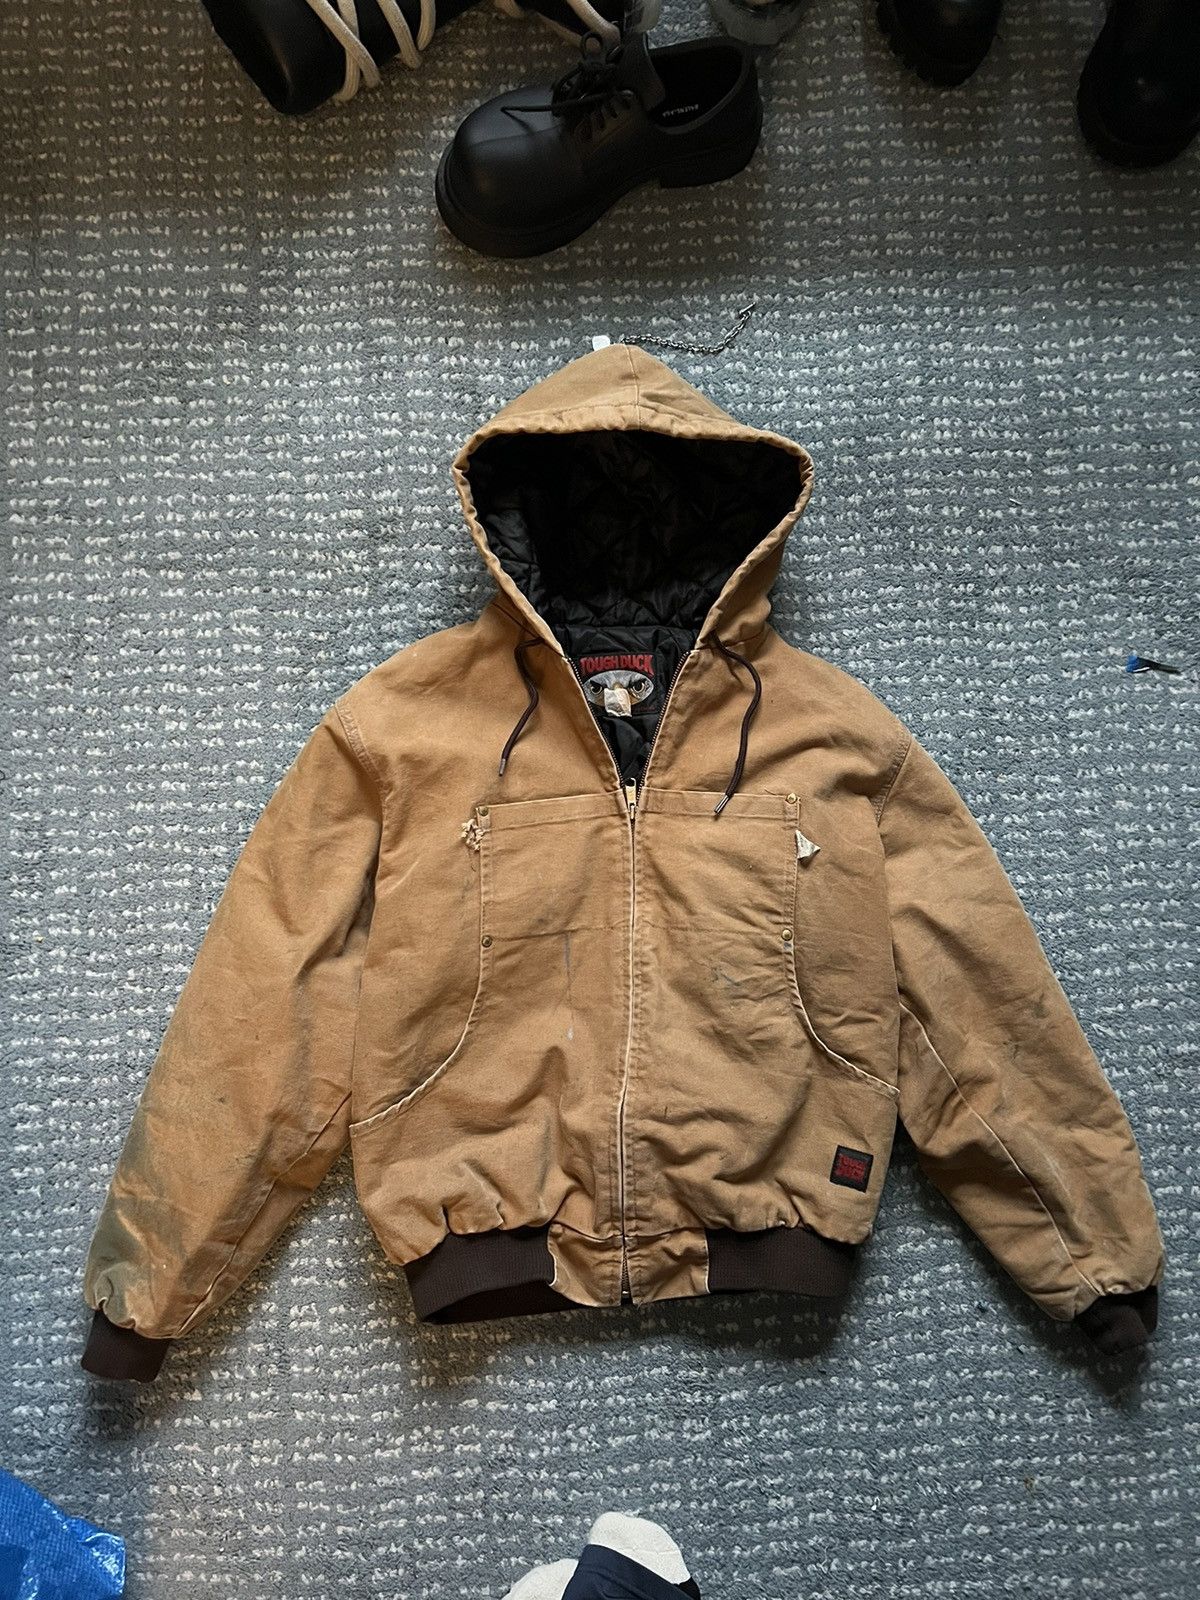 Pre-owned Carhartt X Vintage Super Cool Carhartt Style Workwear Bomber Jacket In Brown Tan